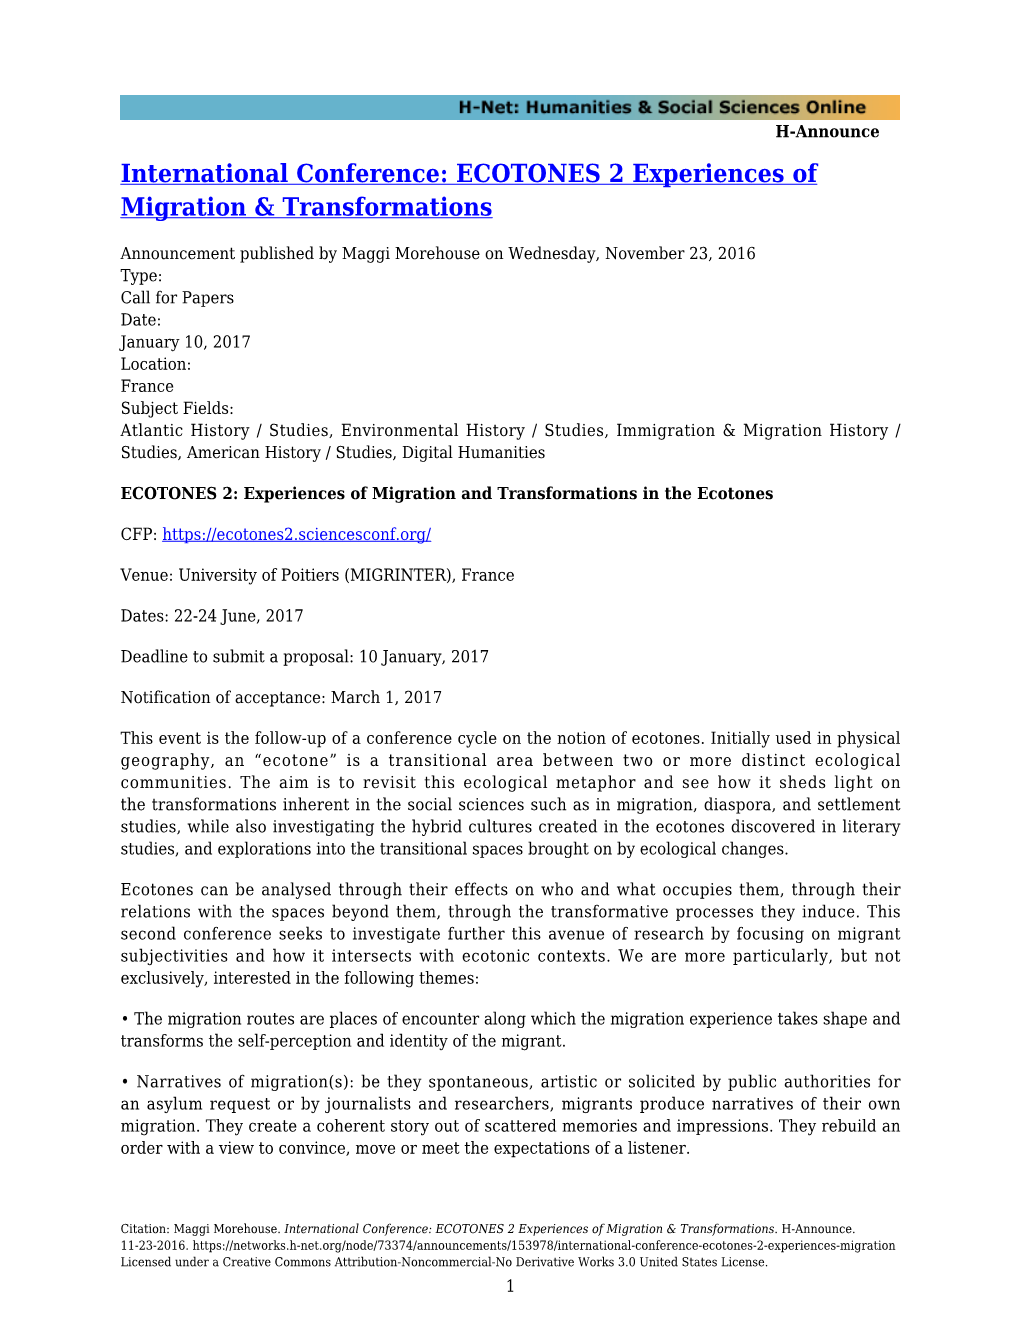 International Conference: ECOTONES 2 Experiences of Migration & Transformations